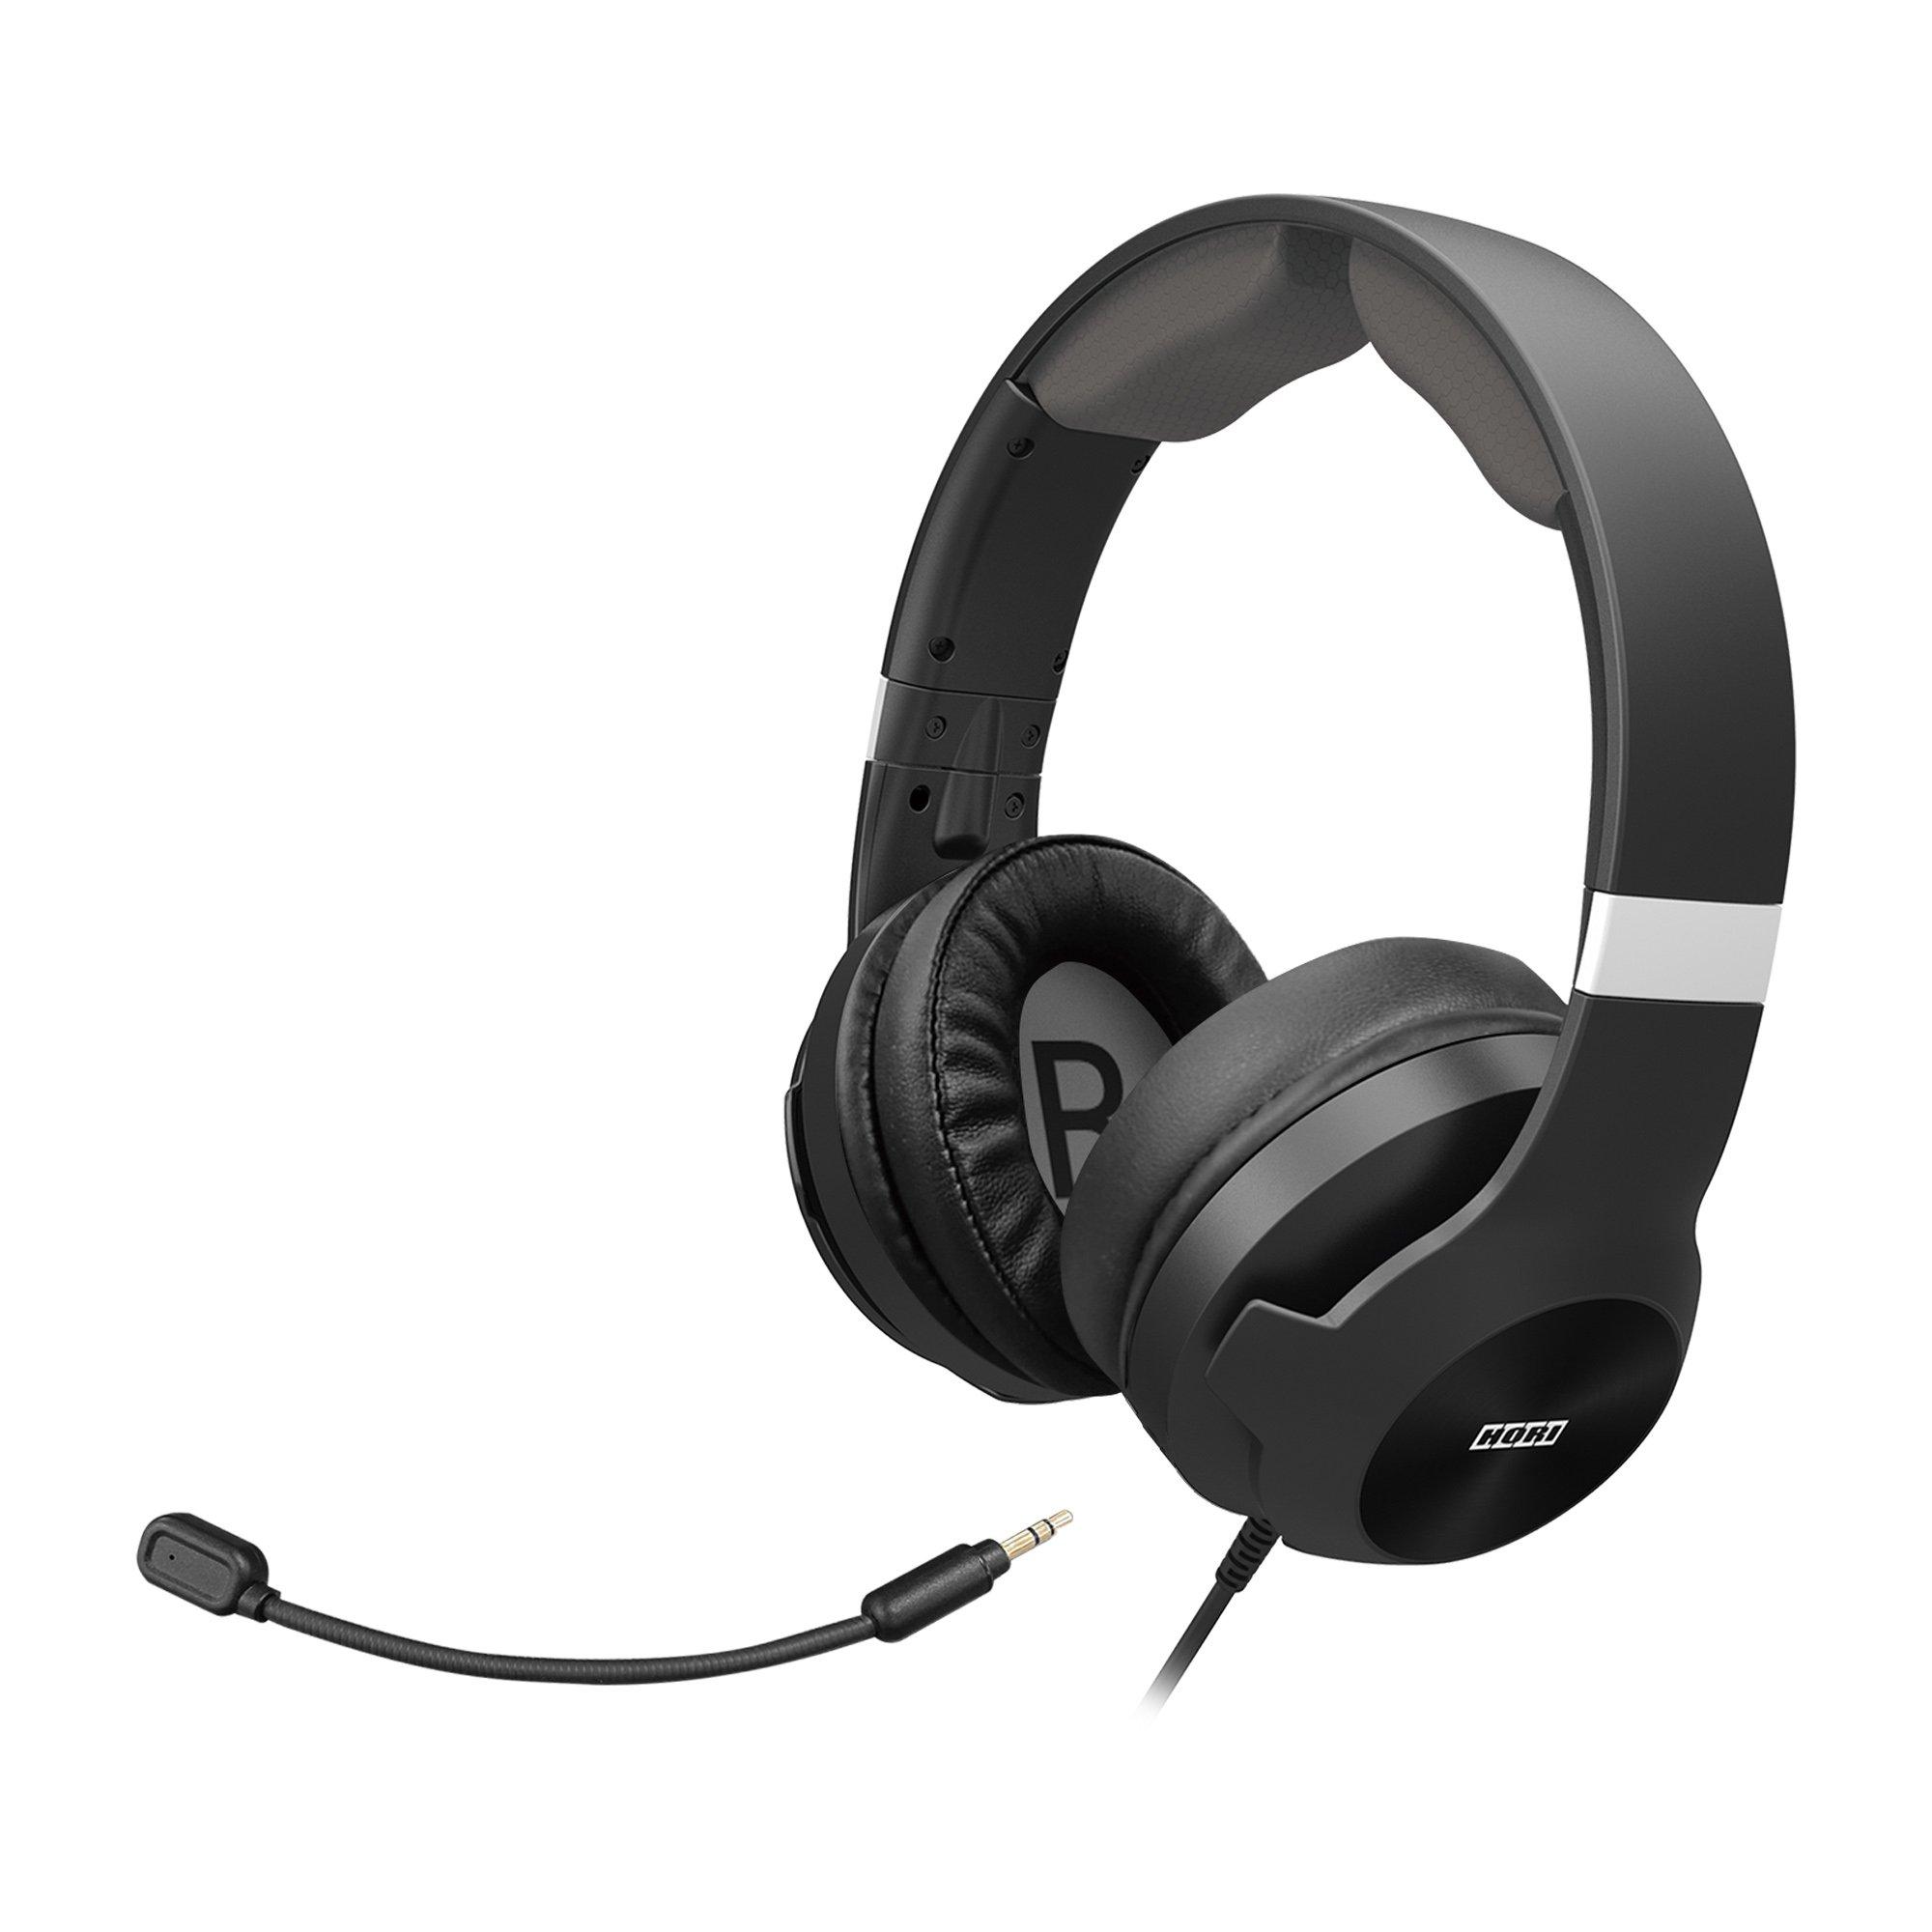 Perfect Best Gaming Headset For Pc And Xbox Series X With Cozy Design